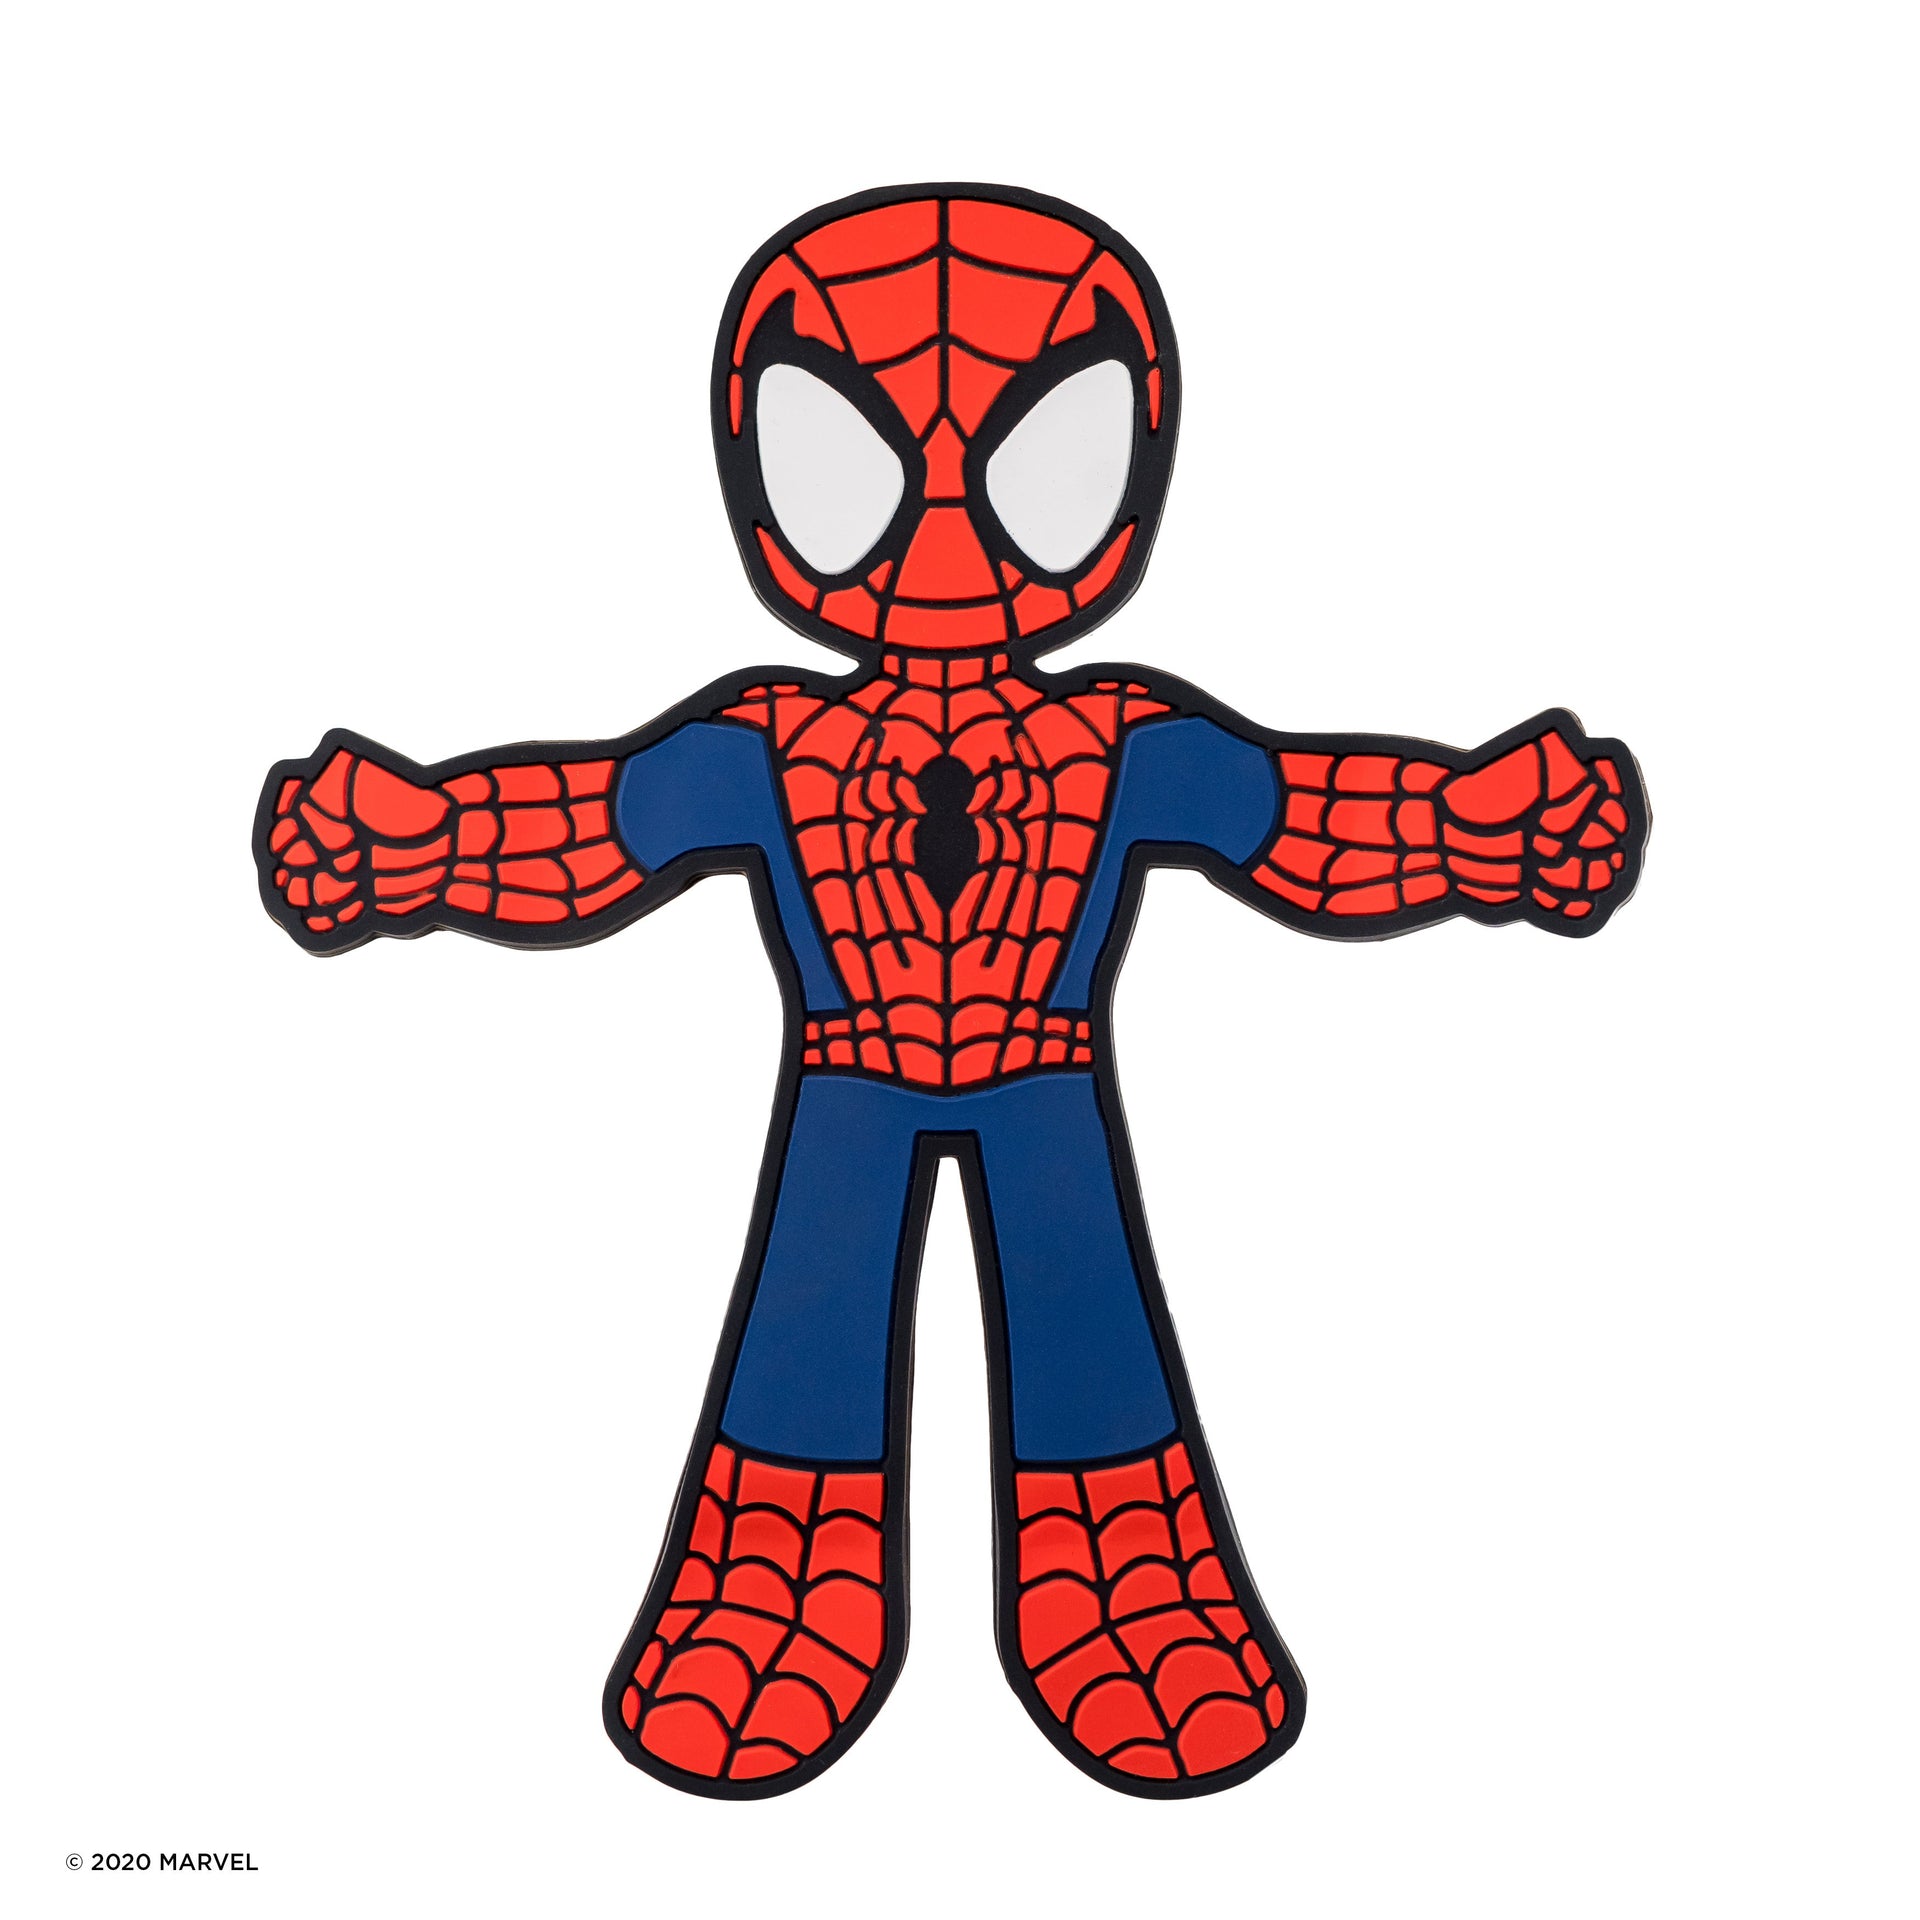 Image of Marvel Comics Spider-Man Hug Buddy with arms and legs in the open position on a white background